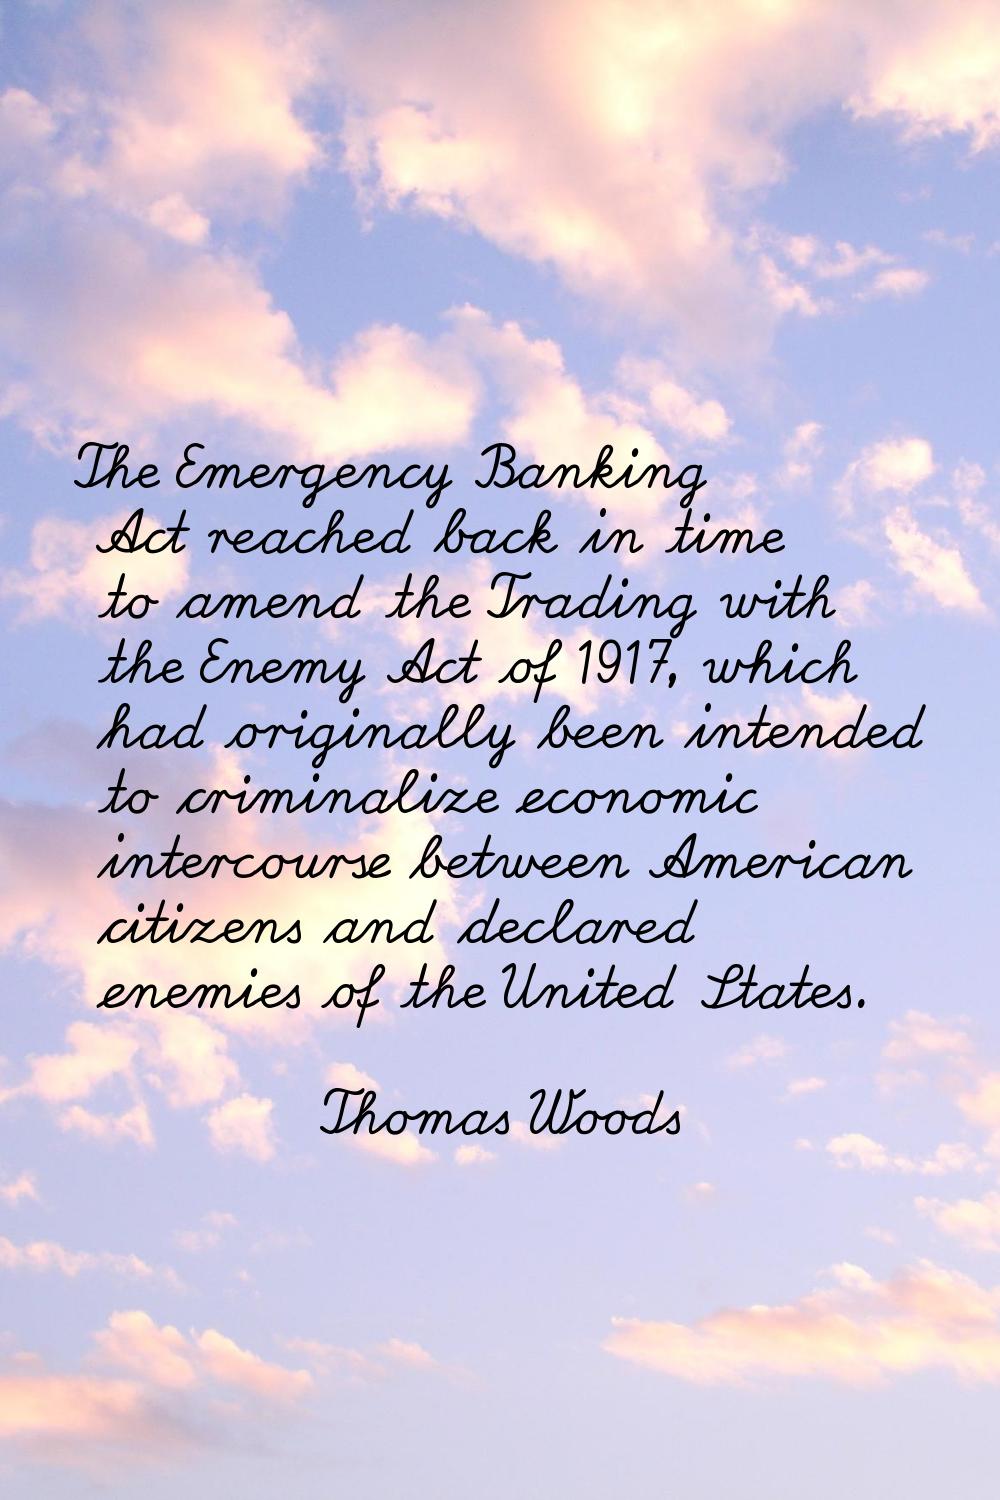 The Emergency Banking Act reached back in time to amend the Trading with the Enemy Act of 1917, whi